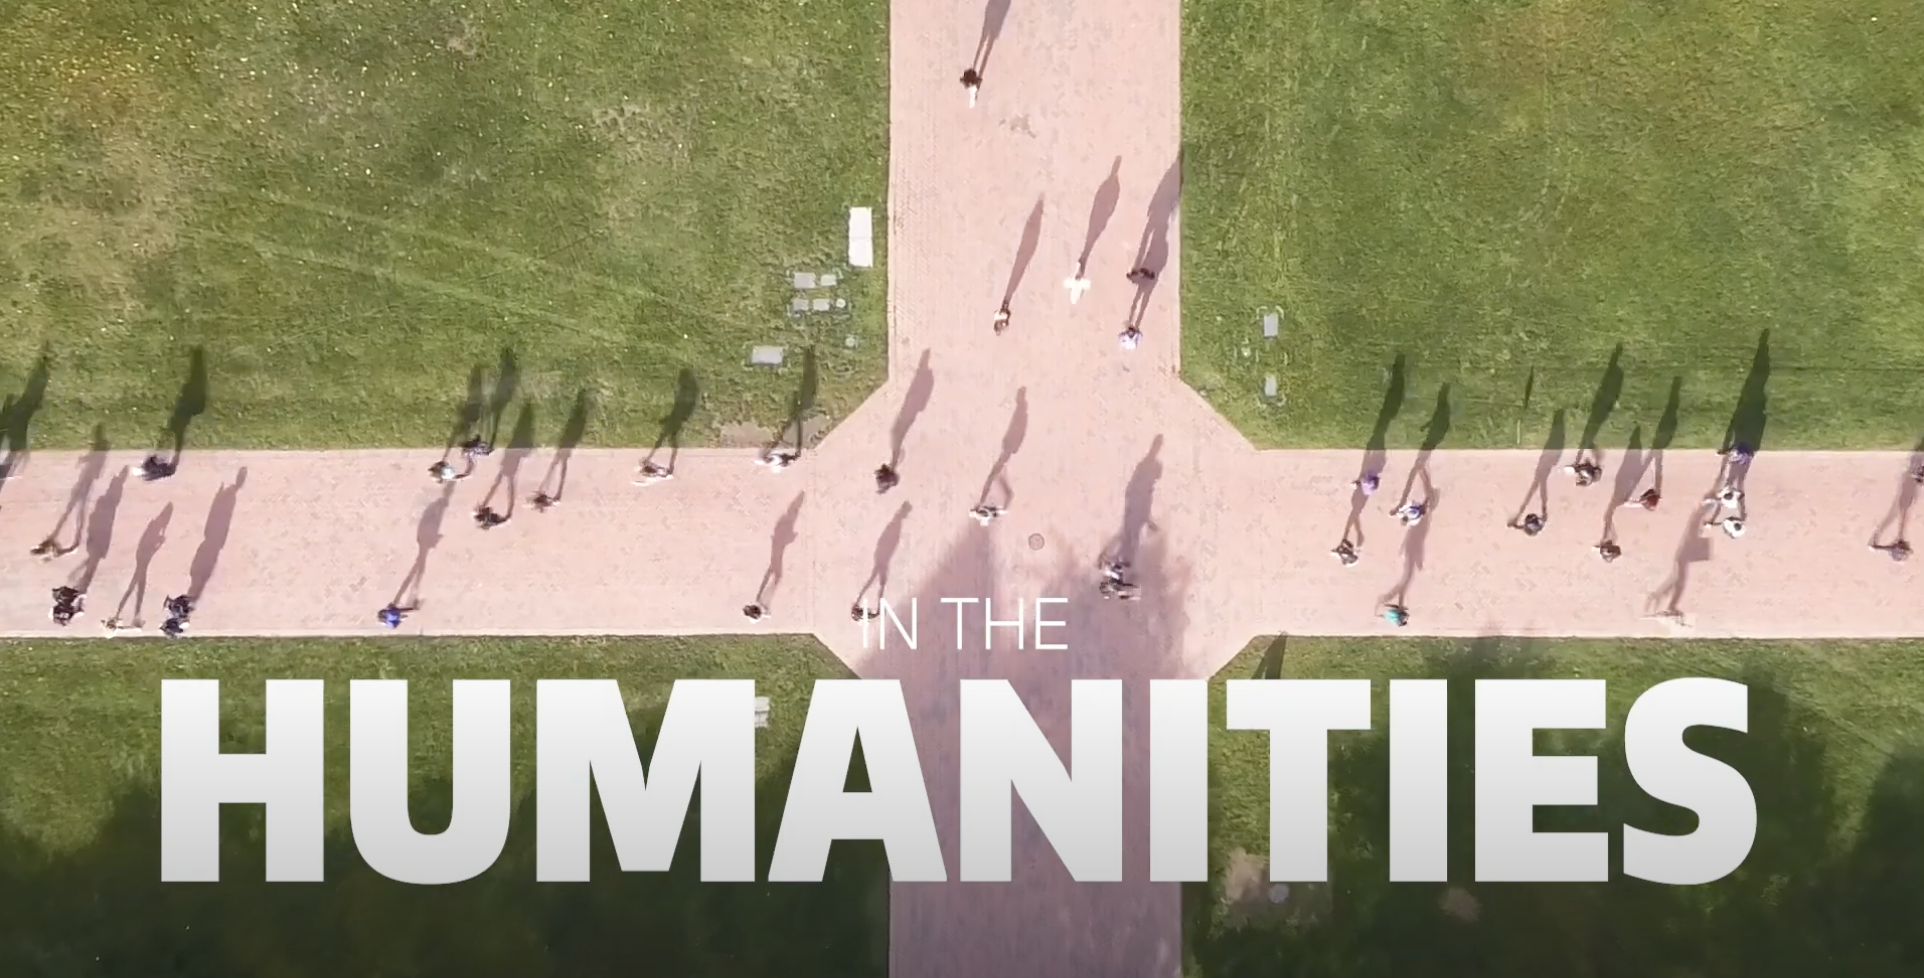 Image of the quad taken from above with the text "in the Humanities" at the bottom of the image.